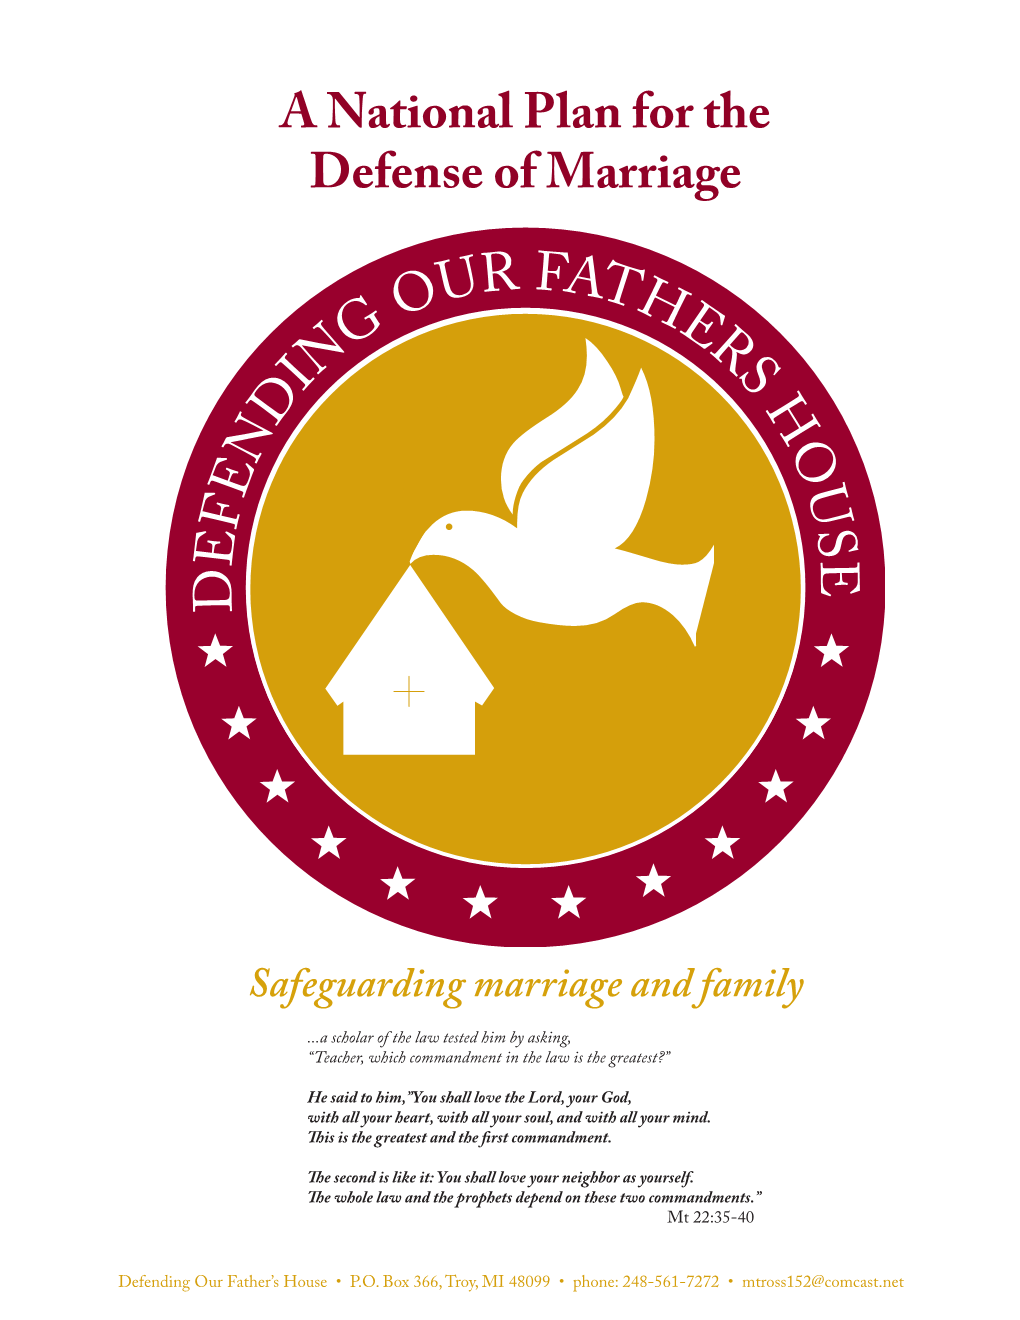 A National Plan for the Defense of Marriage